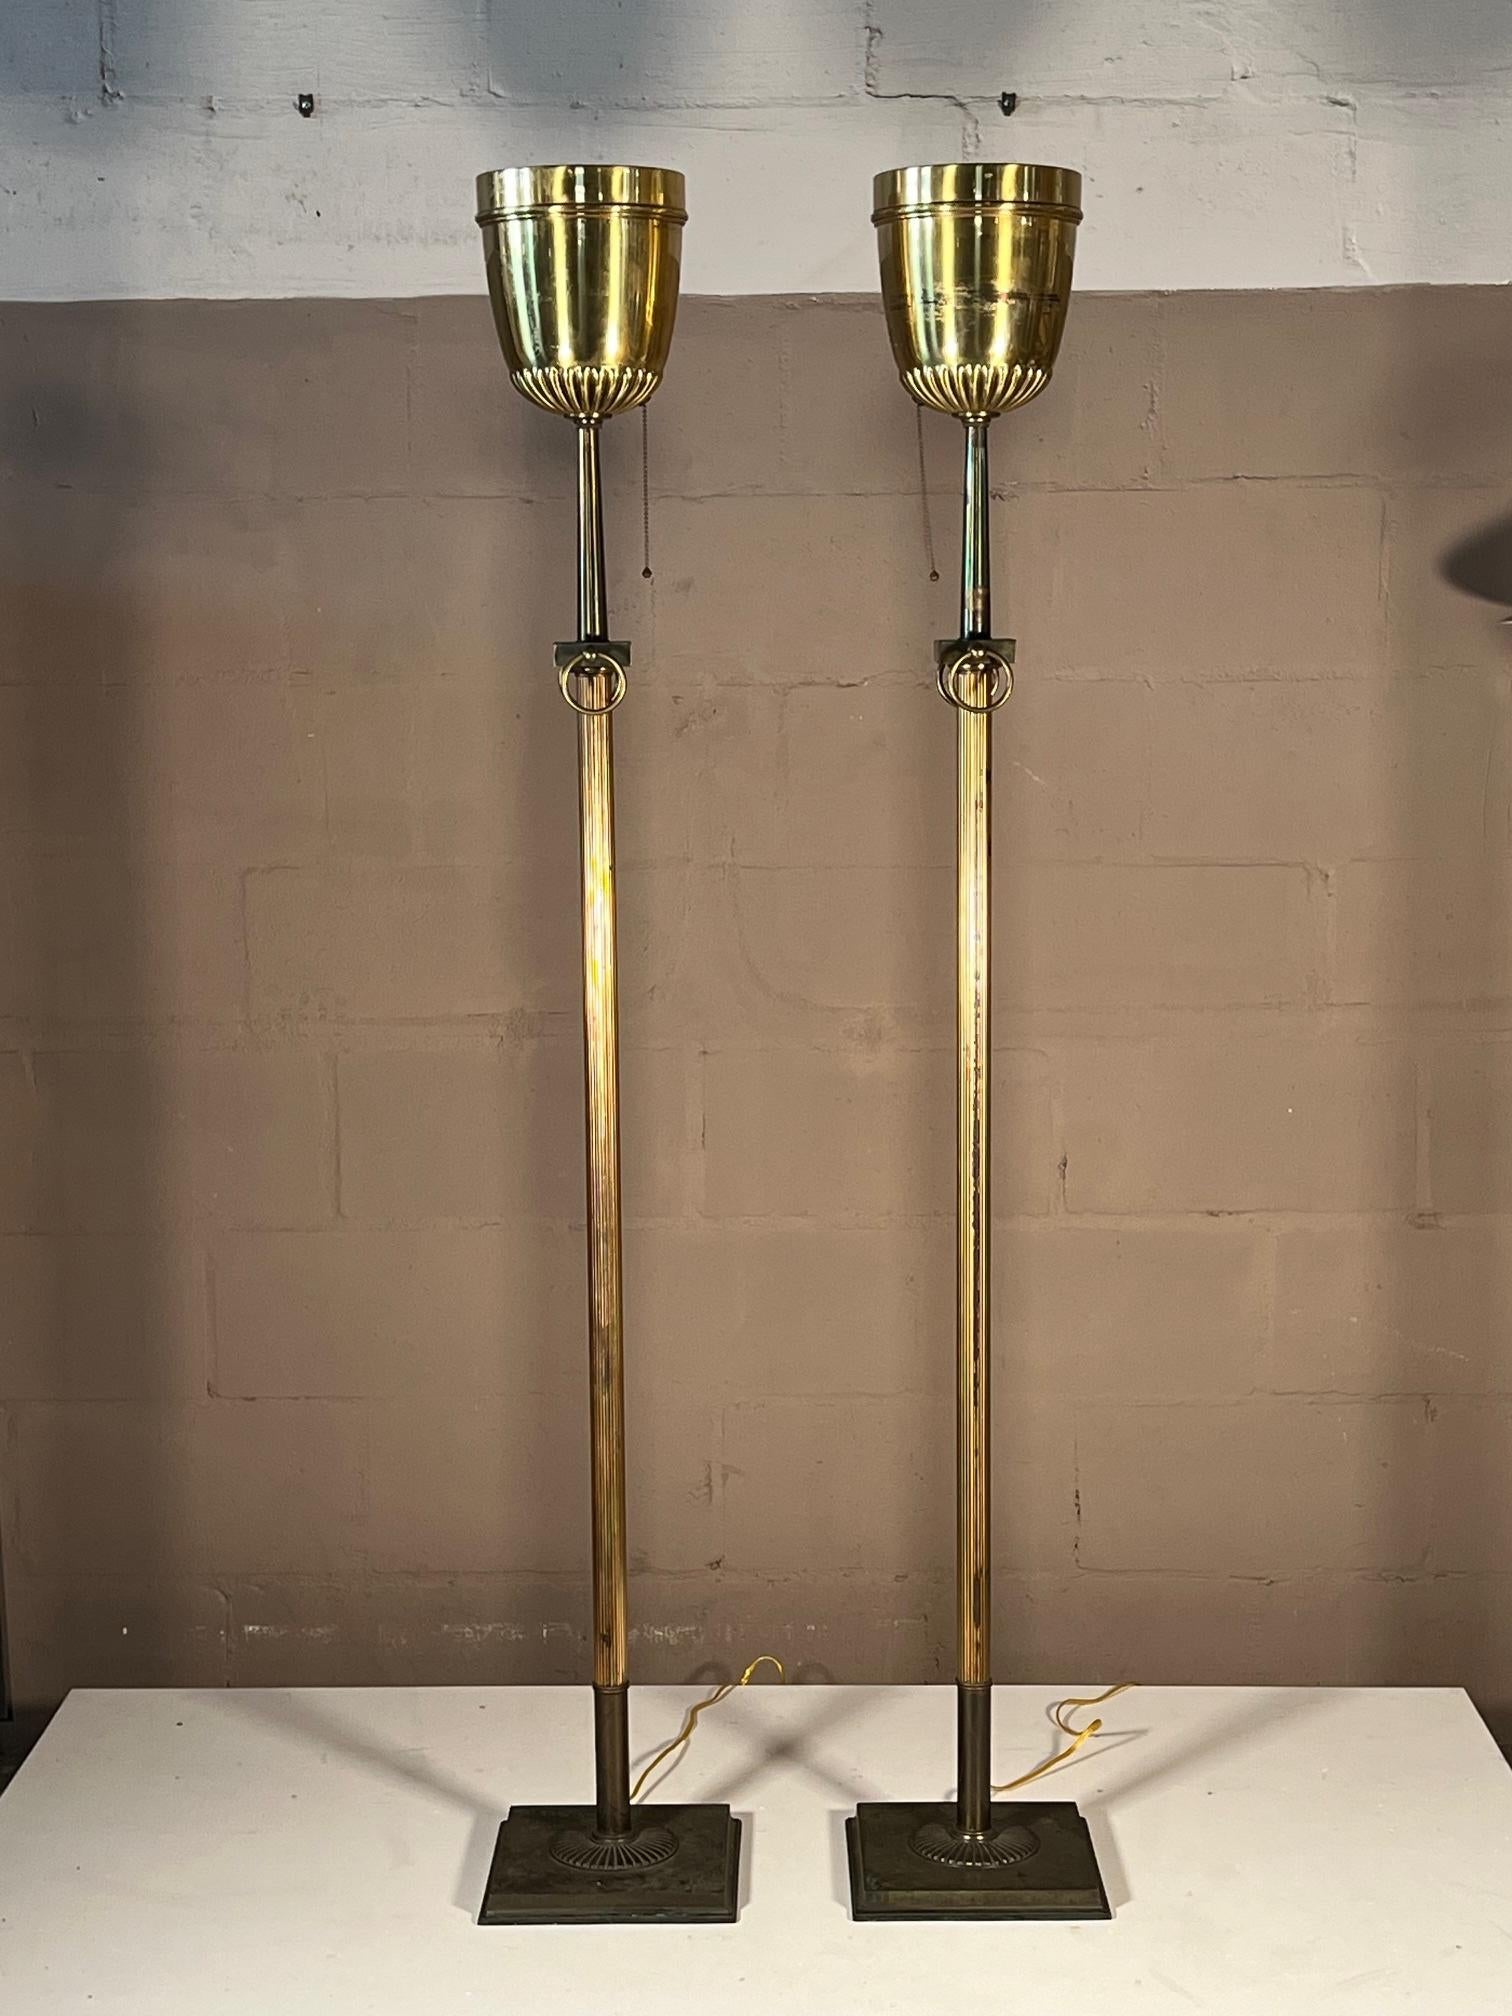 A pair of stylish vintage brass torchères in Paavo Tynell/Lightolier style. Elegant with nice patina and tarnishing, pull down chain switches. Each one has a pair of decorative rings on top.